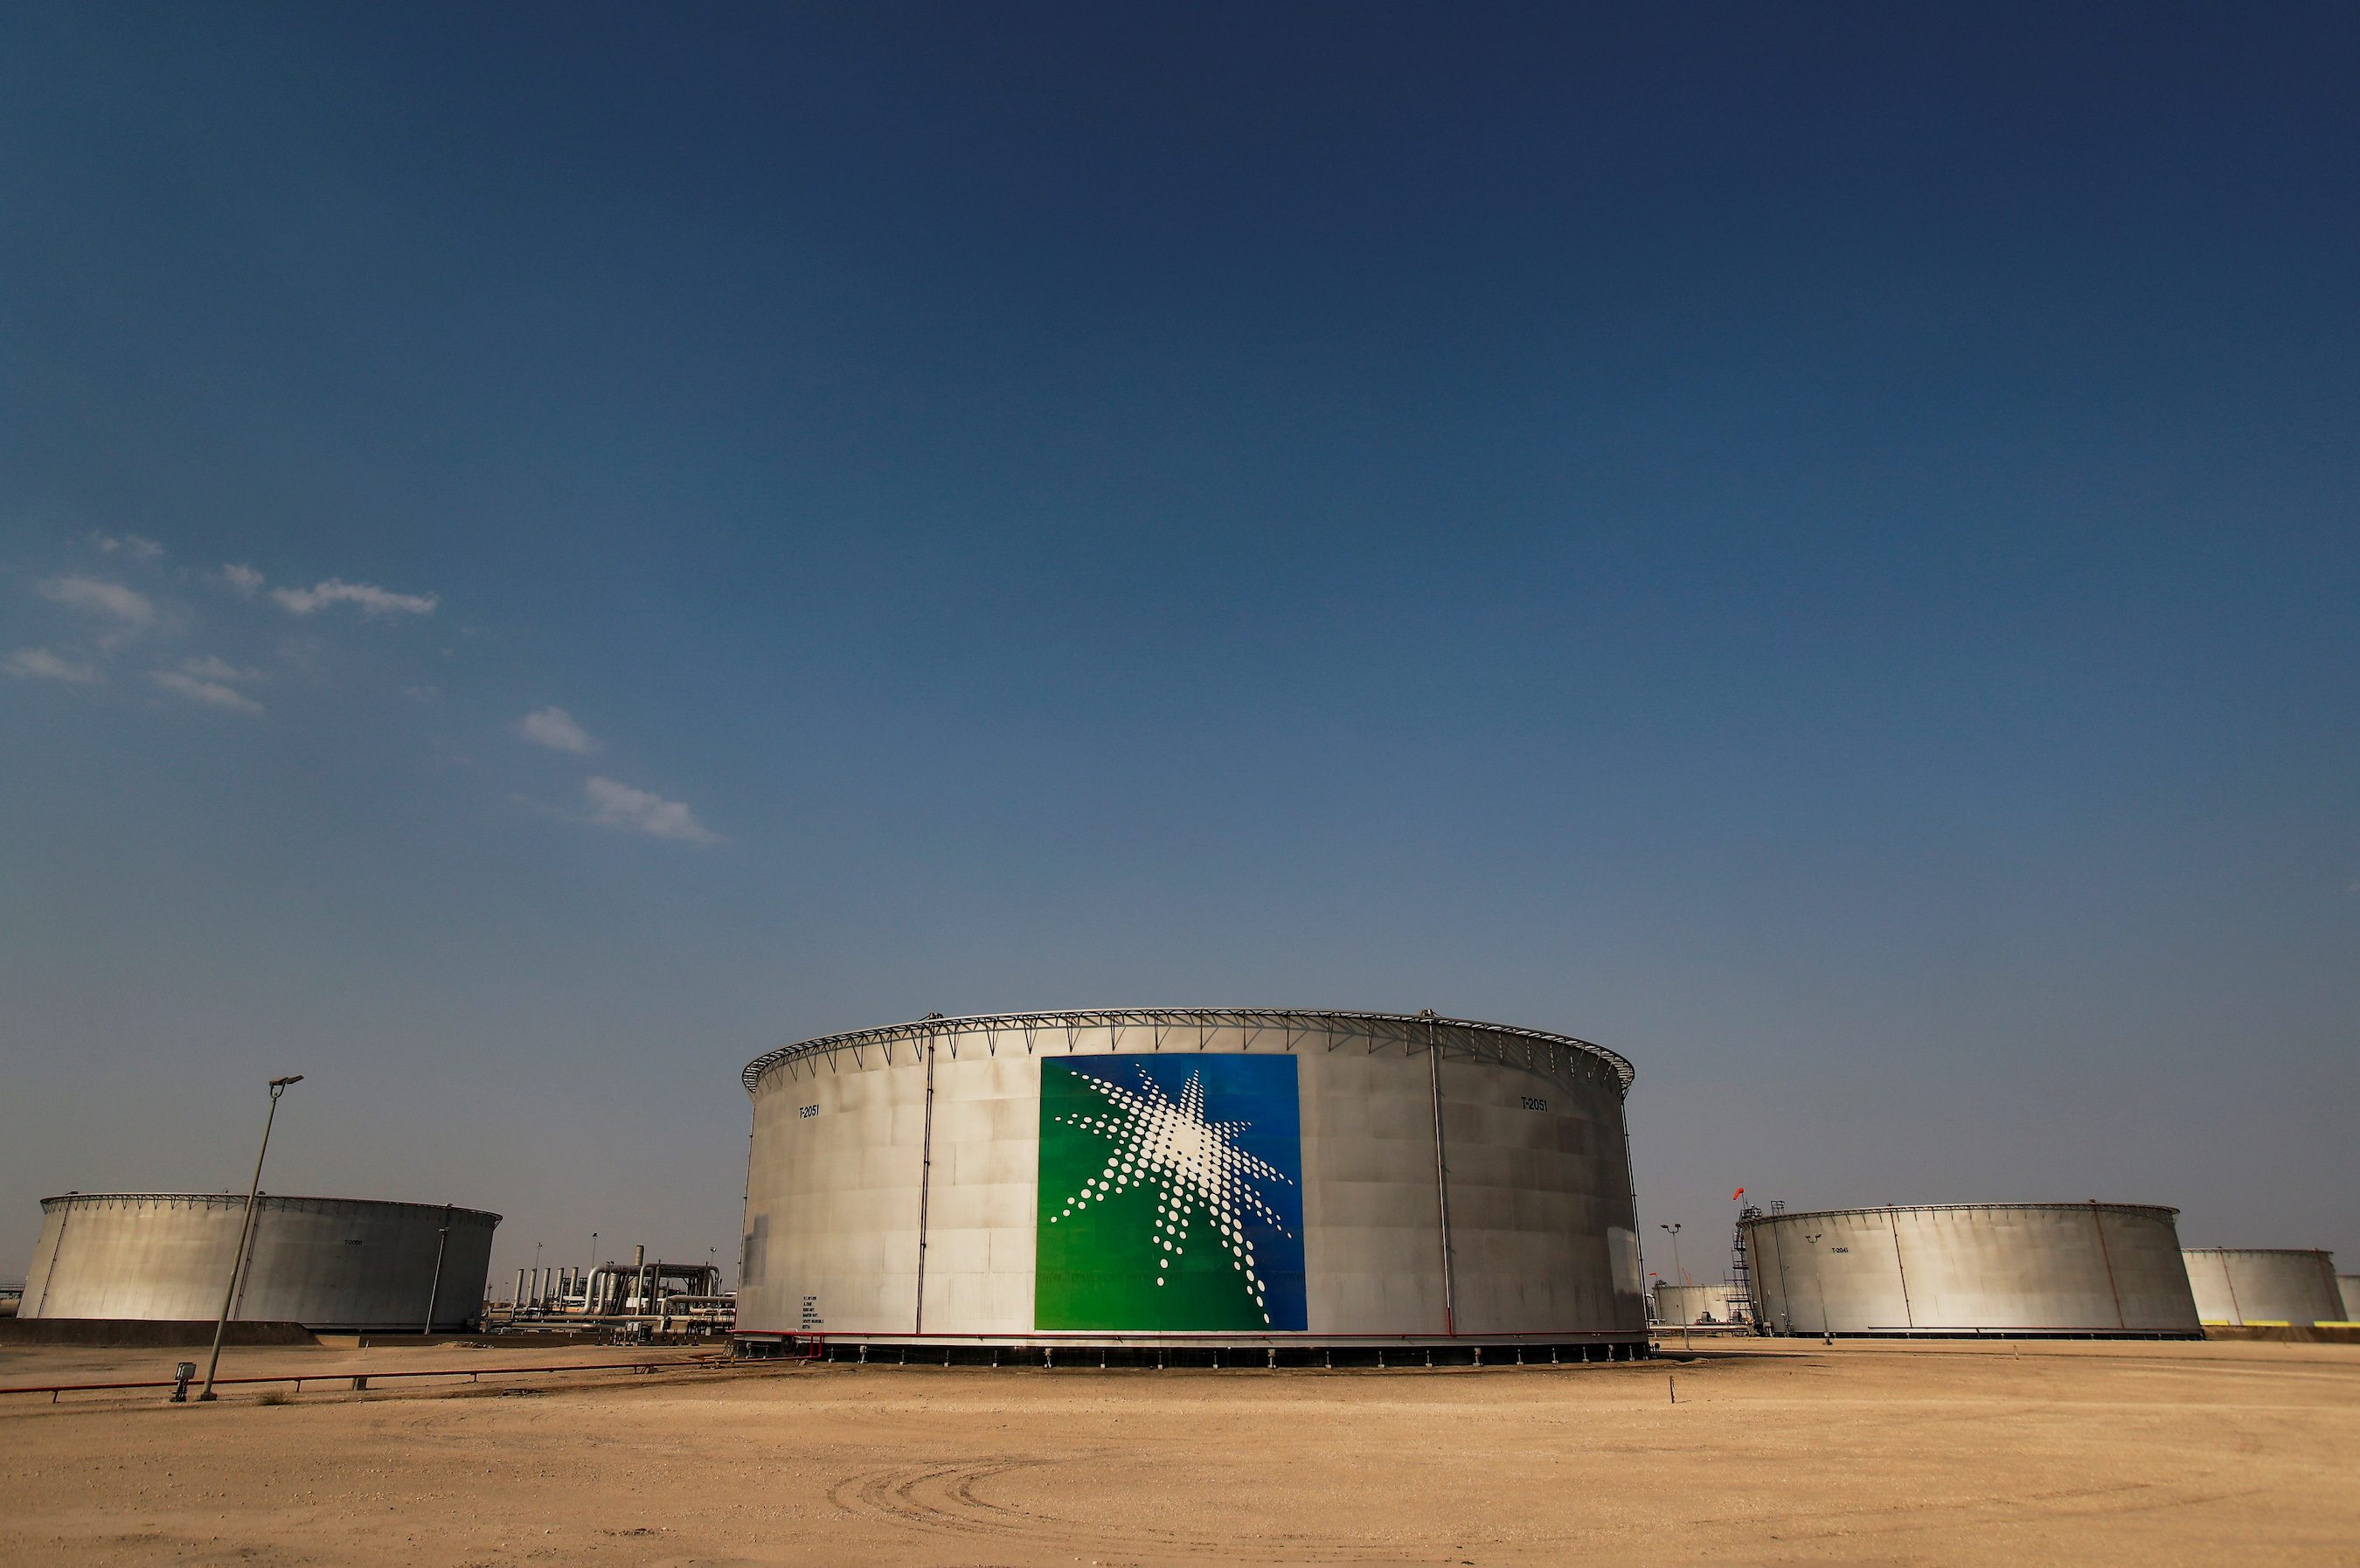 Saudi oil giant Aramco to scale back spending after 2020 profit slump